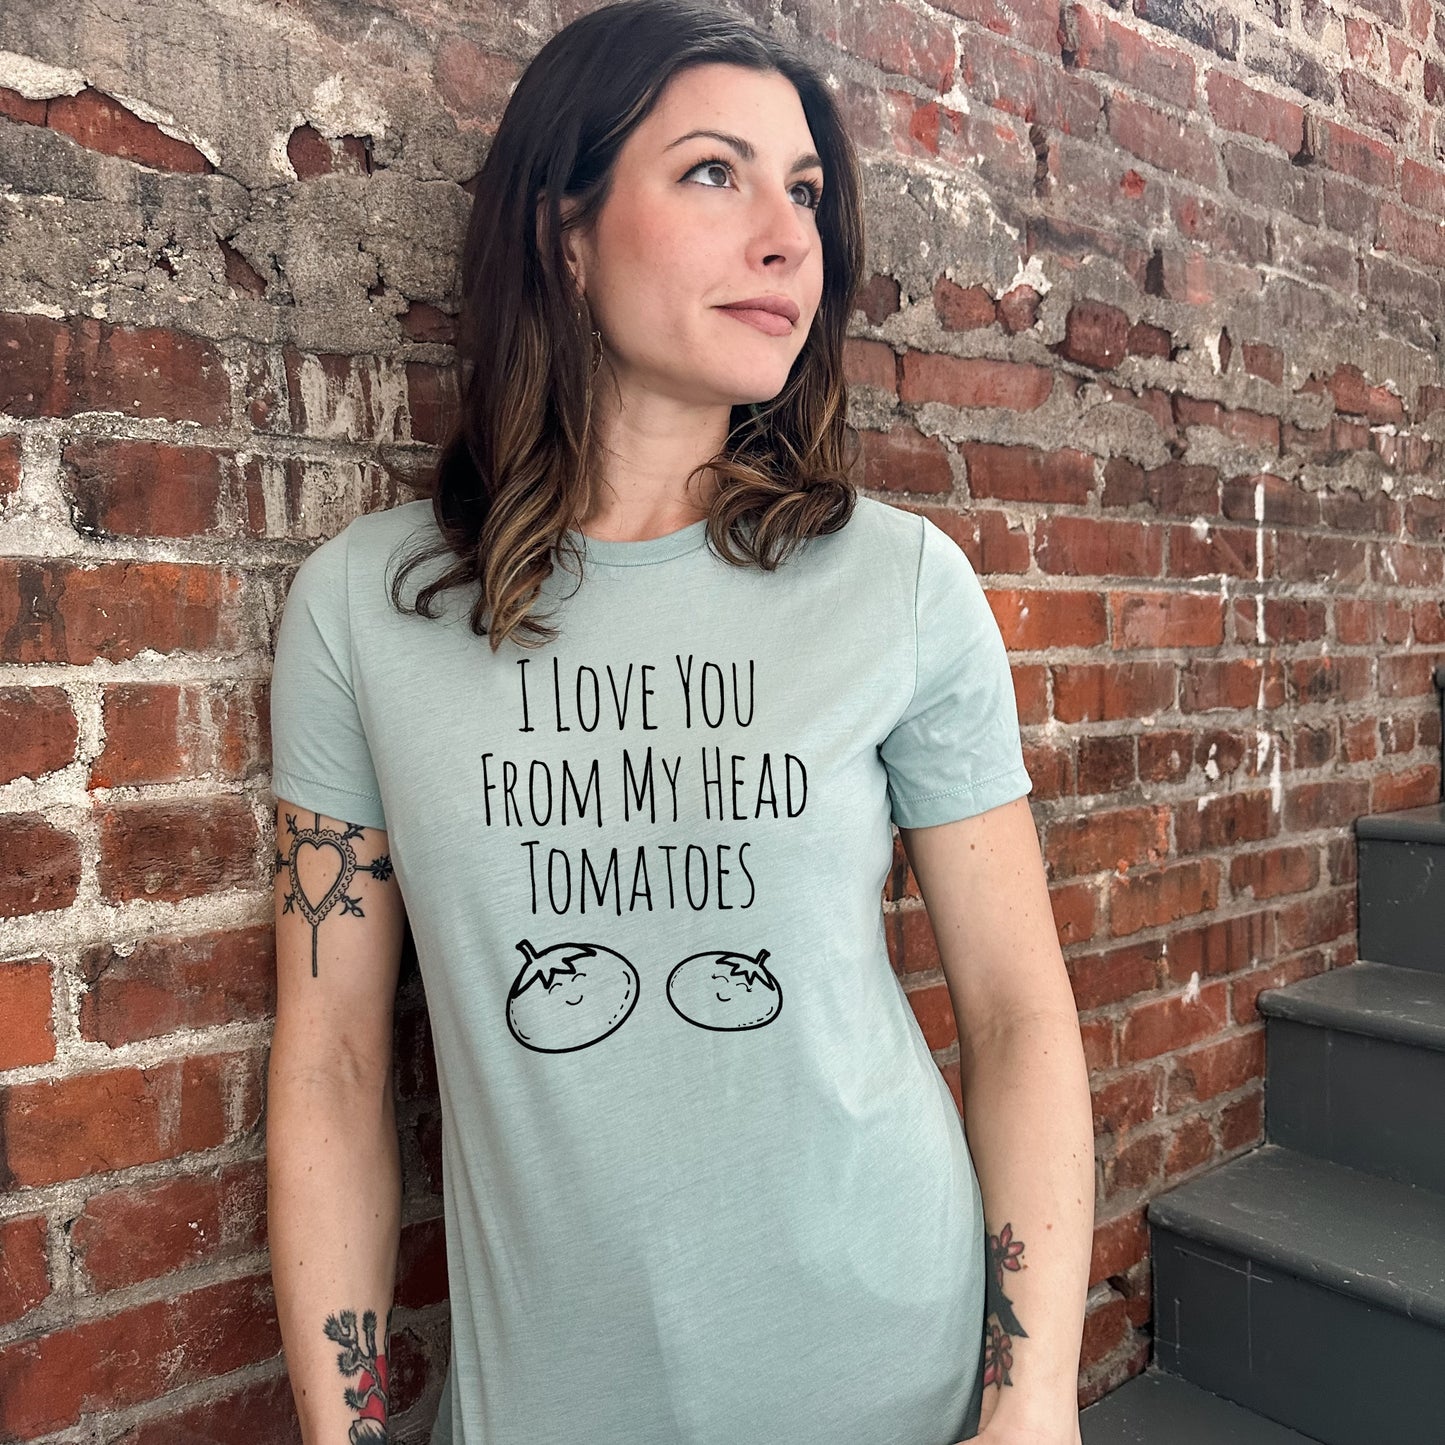 I Love You From My Head Tomatoes - Women's Crew Tee - Olive or Dusty Blue